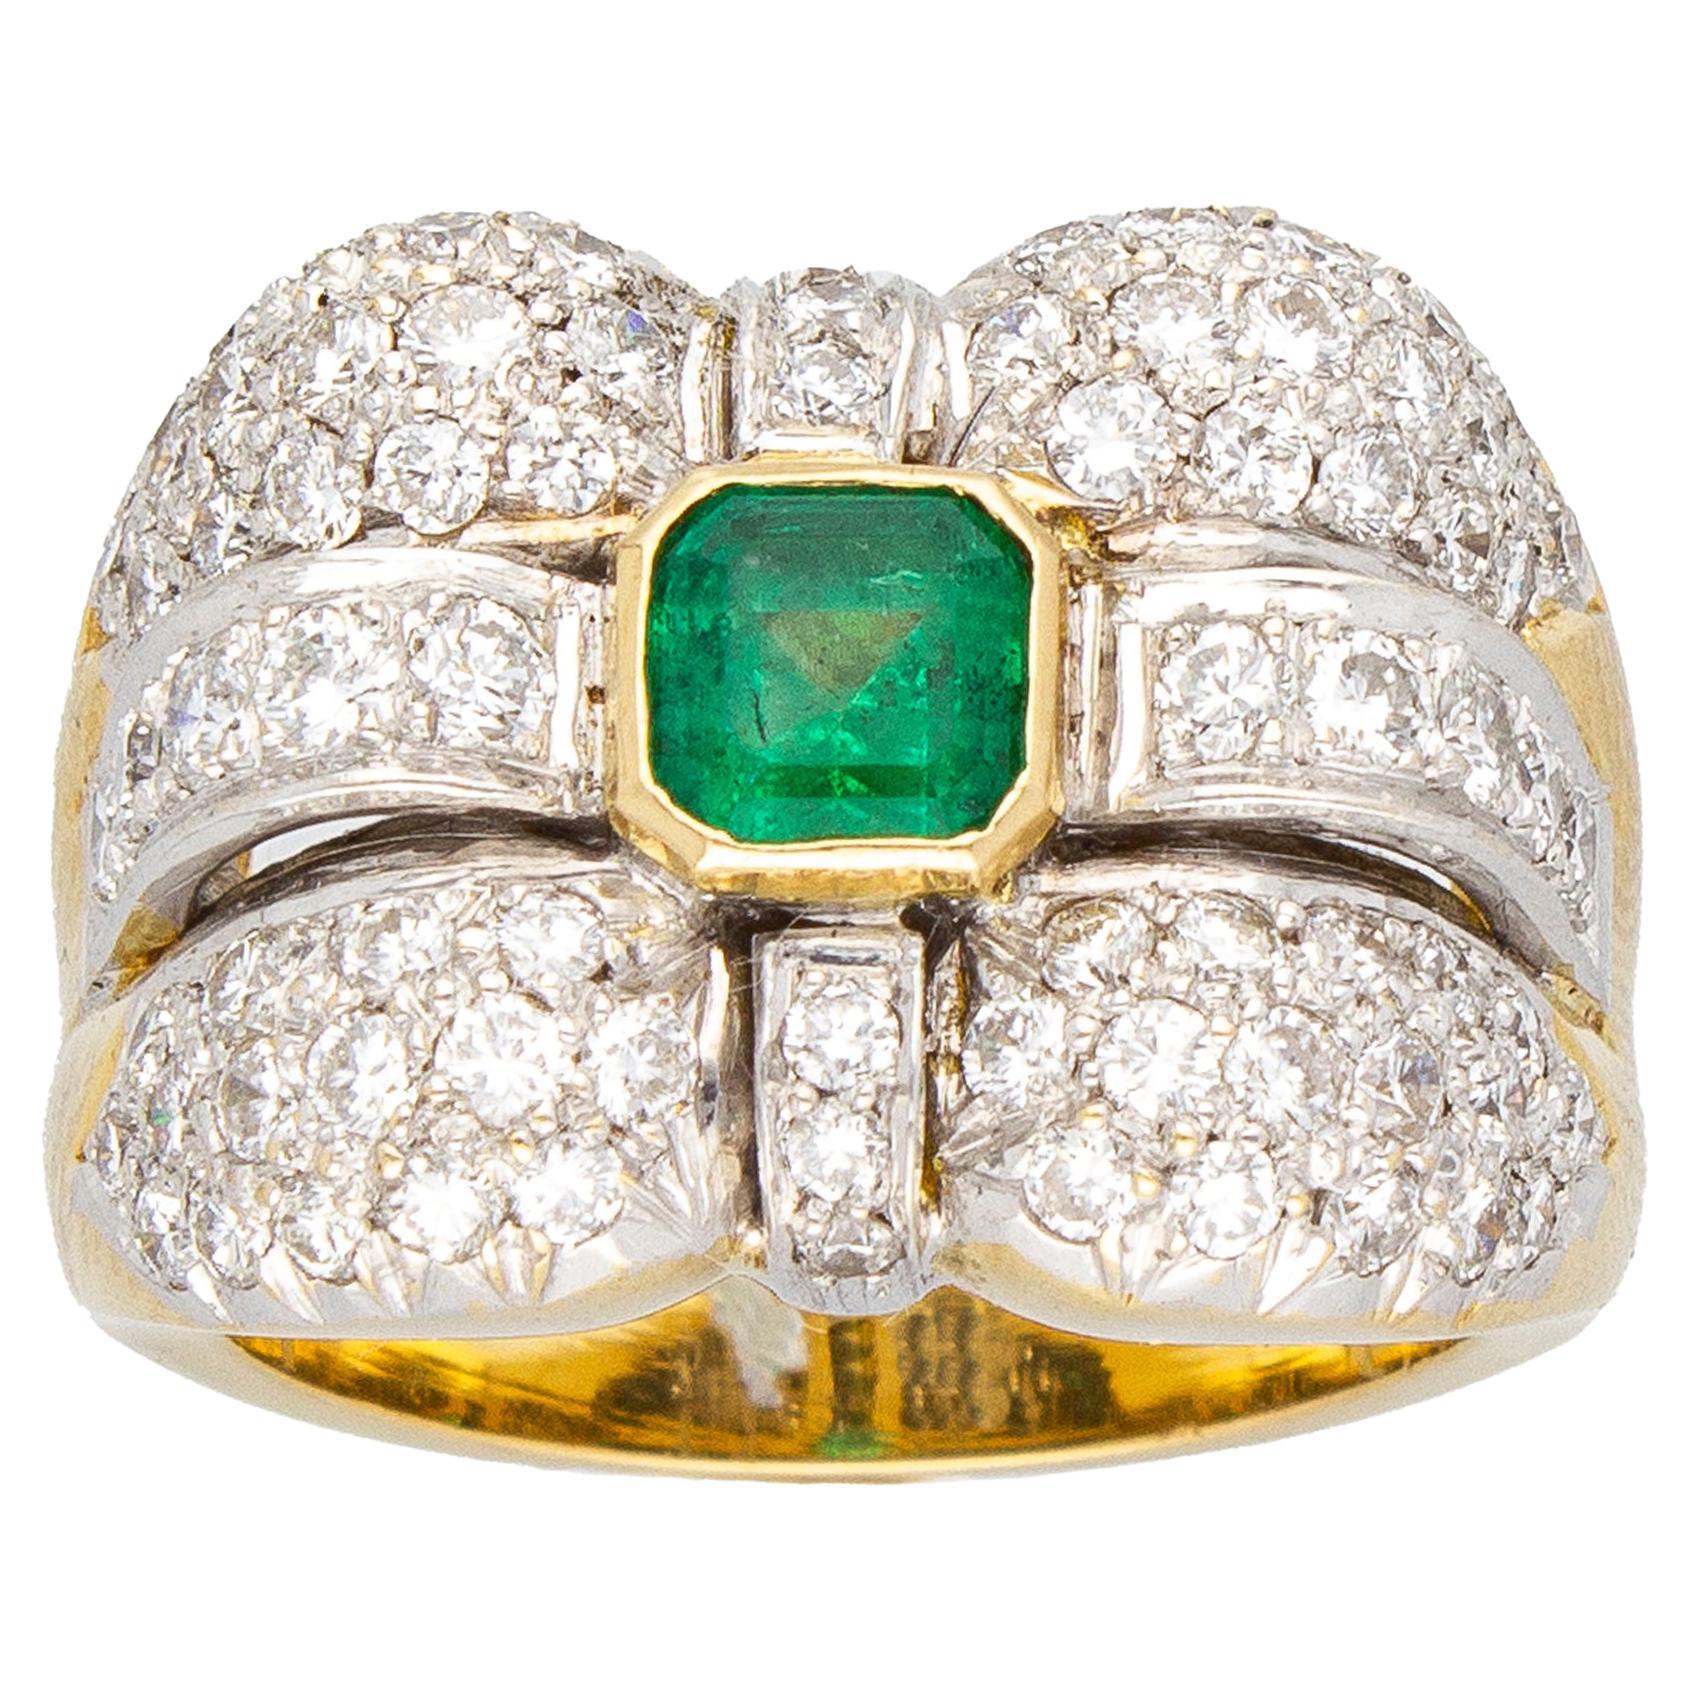 Emerald 0.70 ct, Diamonds 1.60 ct. Contemporary Band Ring.18 Kt Gold. Made Italy